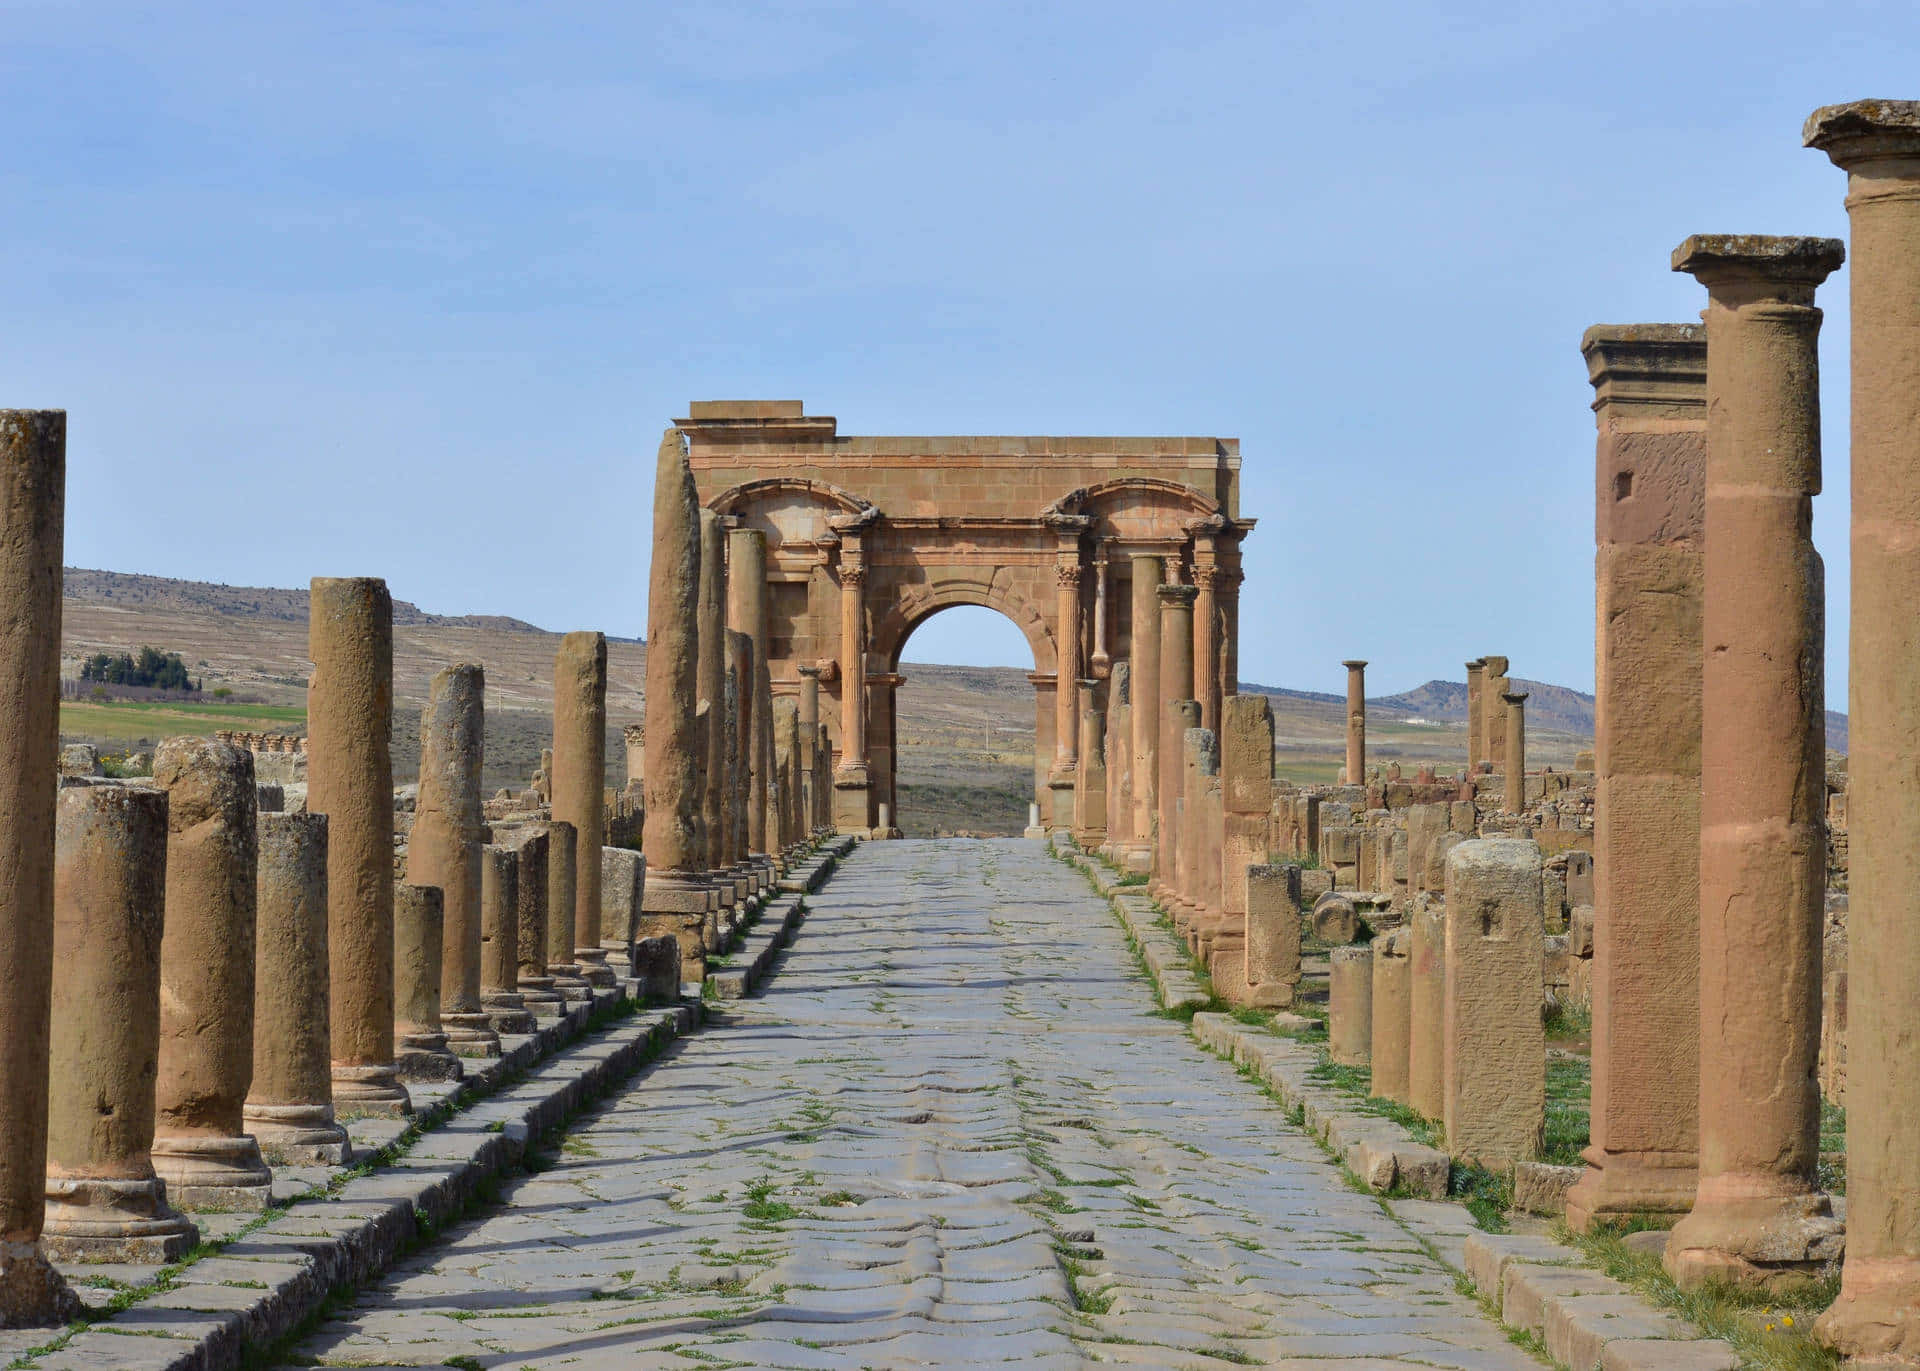 "The Ancient Ruins of Timgad in Algeria"